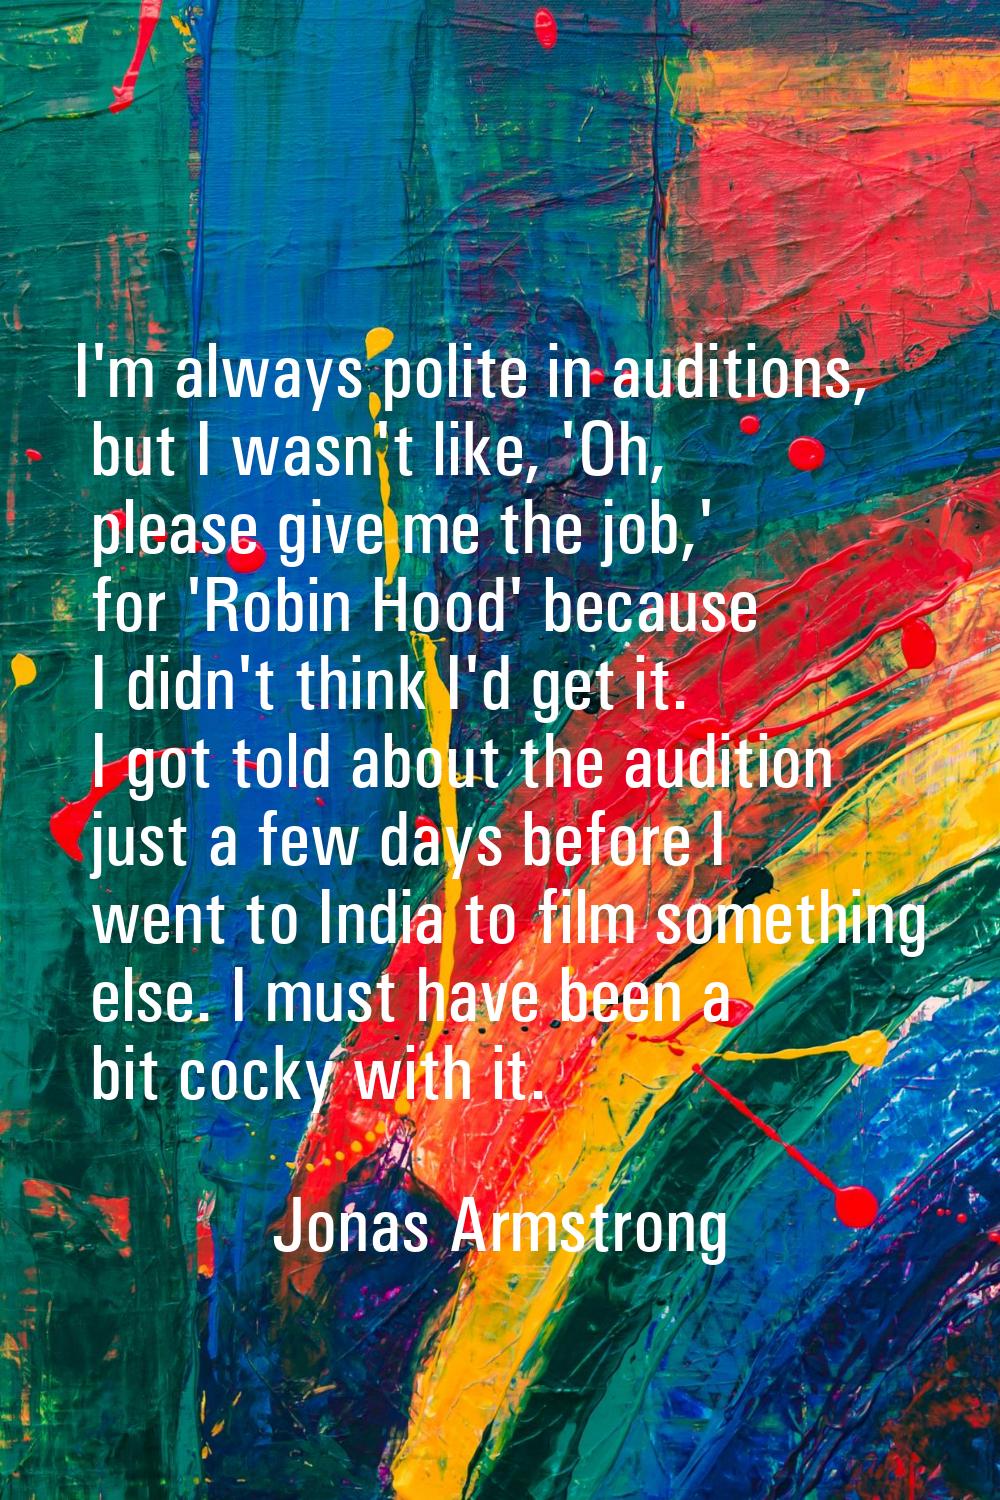 I'm always polite in auditions, but I wasn't like, 'Oh, please give me the job,' for 'Robin Hood' b